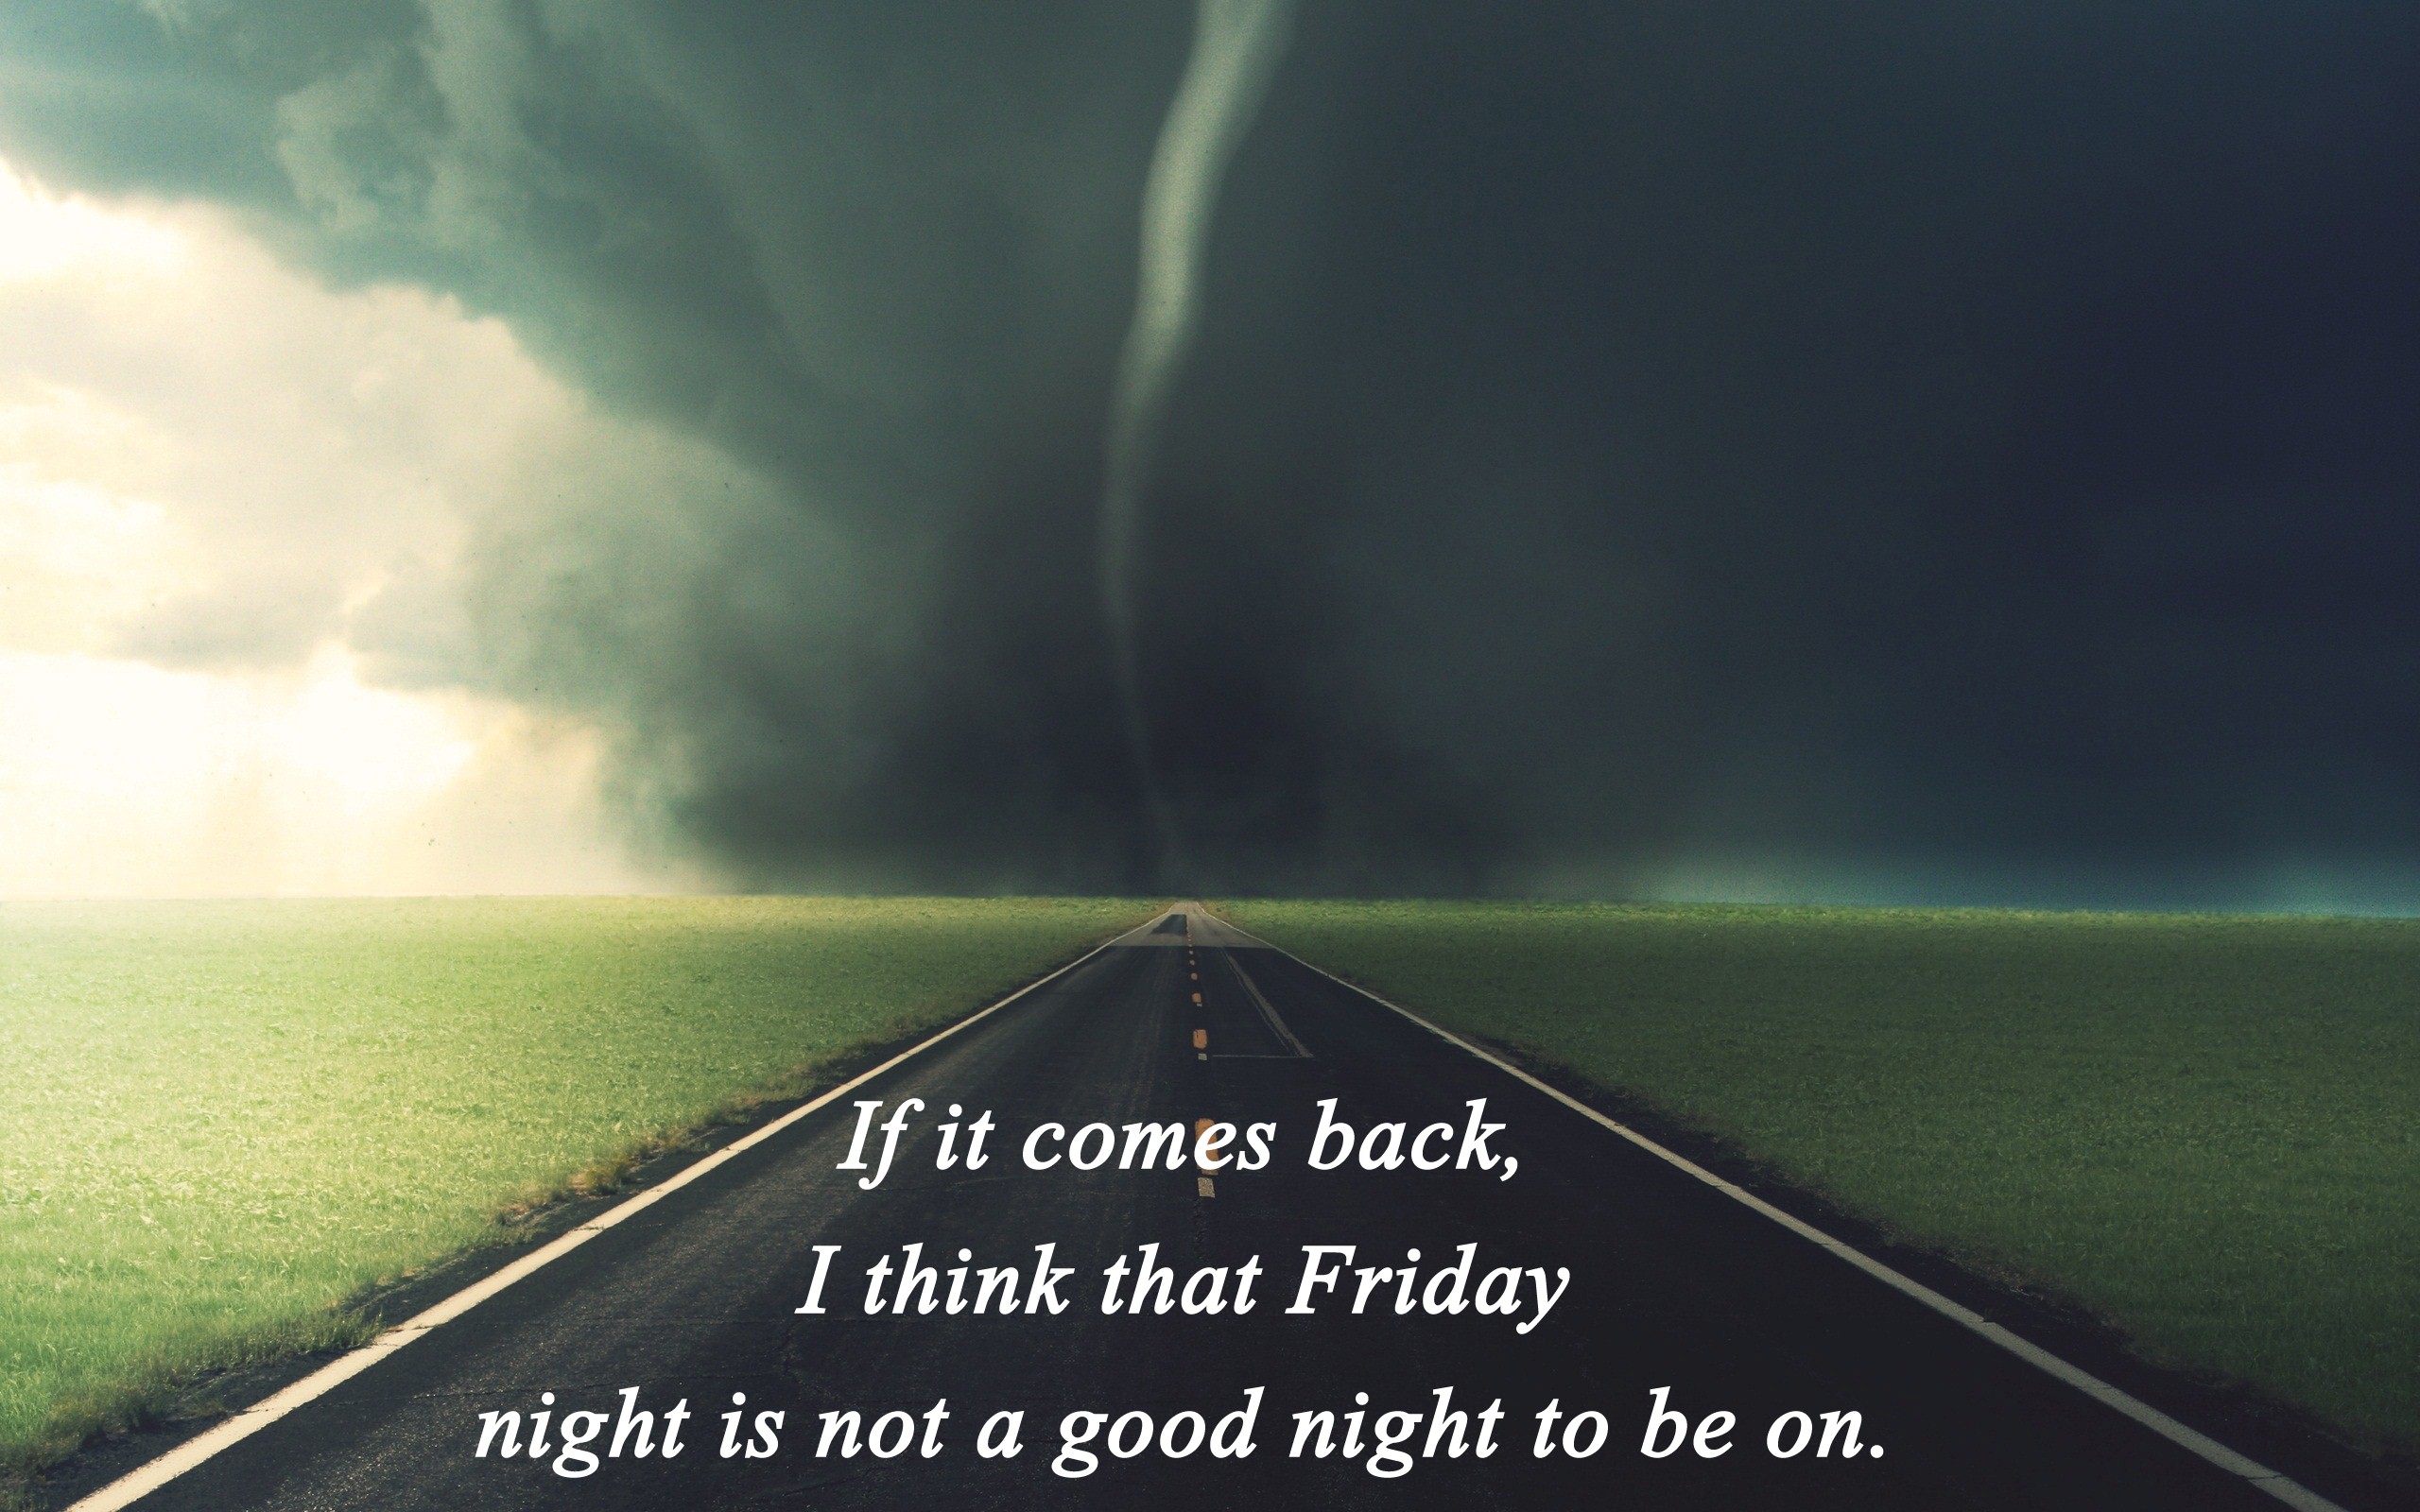 New Latest Hd Thoughts Desktop Background Wallpaper - Good Night Awesome  Quote - 2560x1600 Wallpaper 